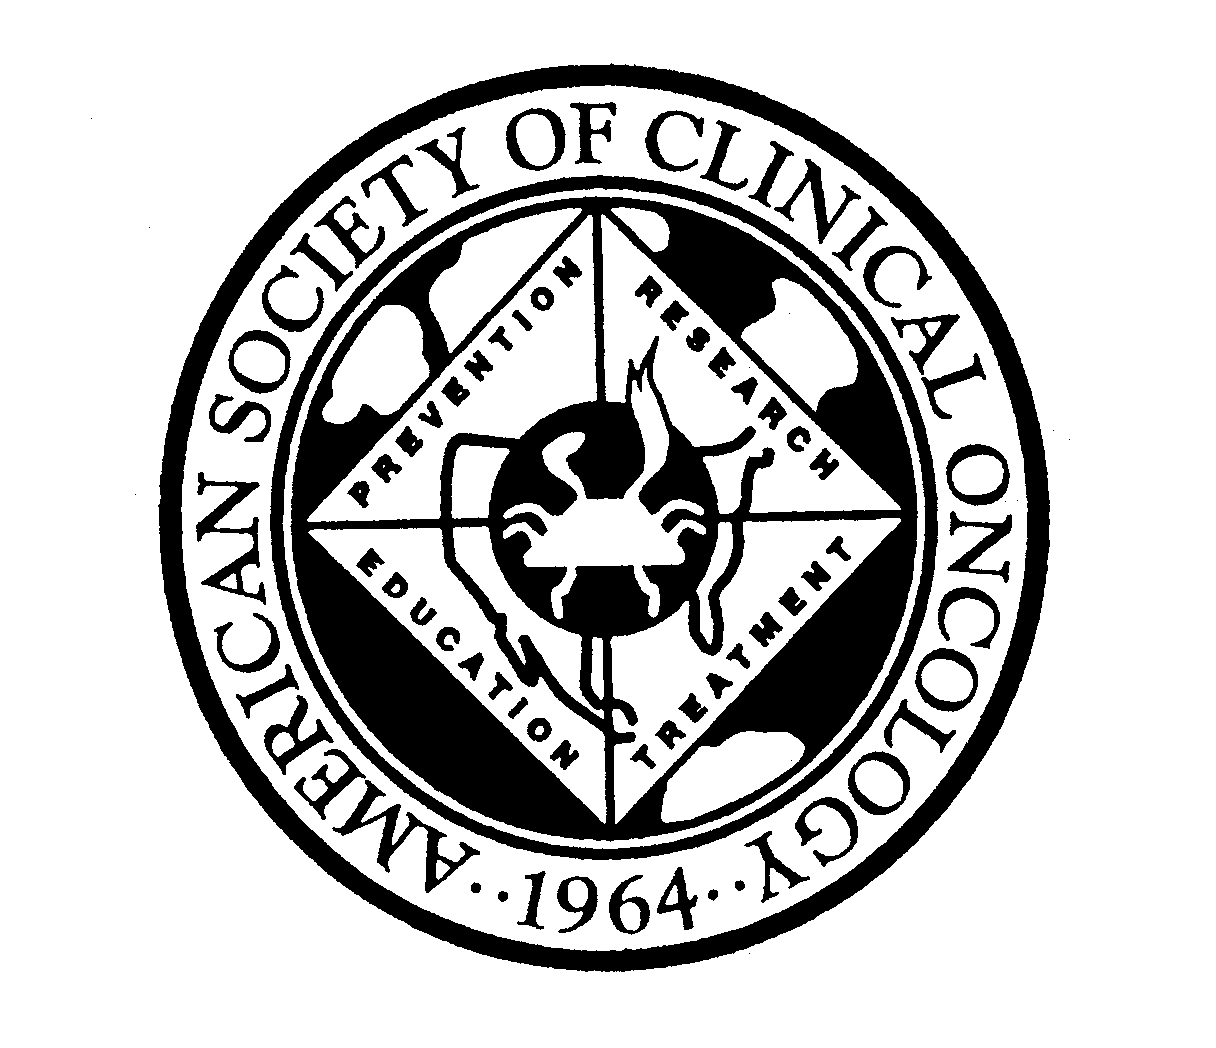  AMERICAN SOCIETY OF CLINICAL ONCOLOGY 1964 PREVENTION RESEARCH TREATMENT EDUCATION